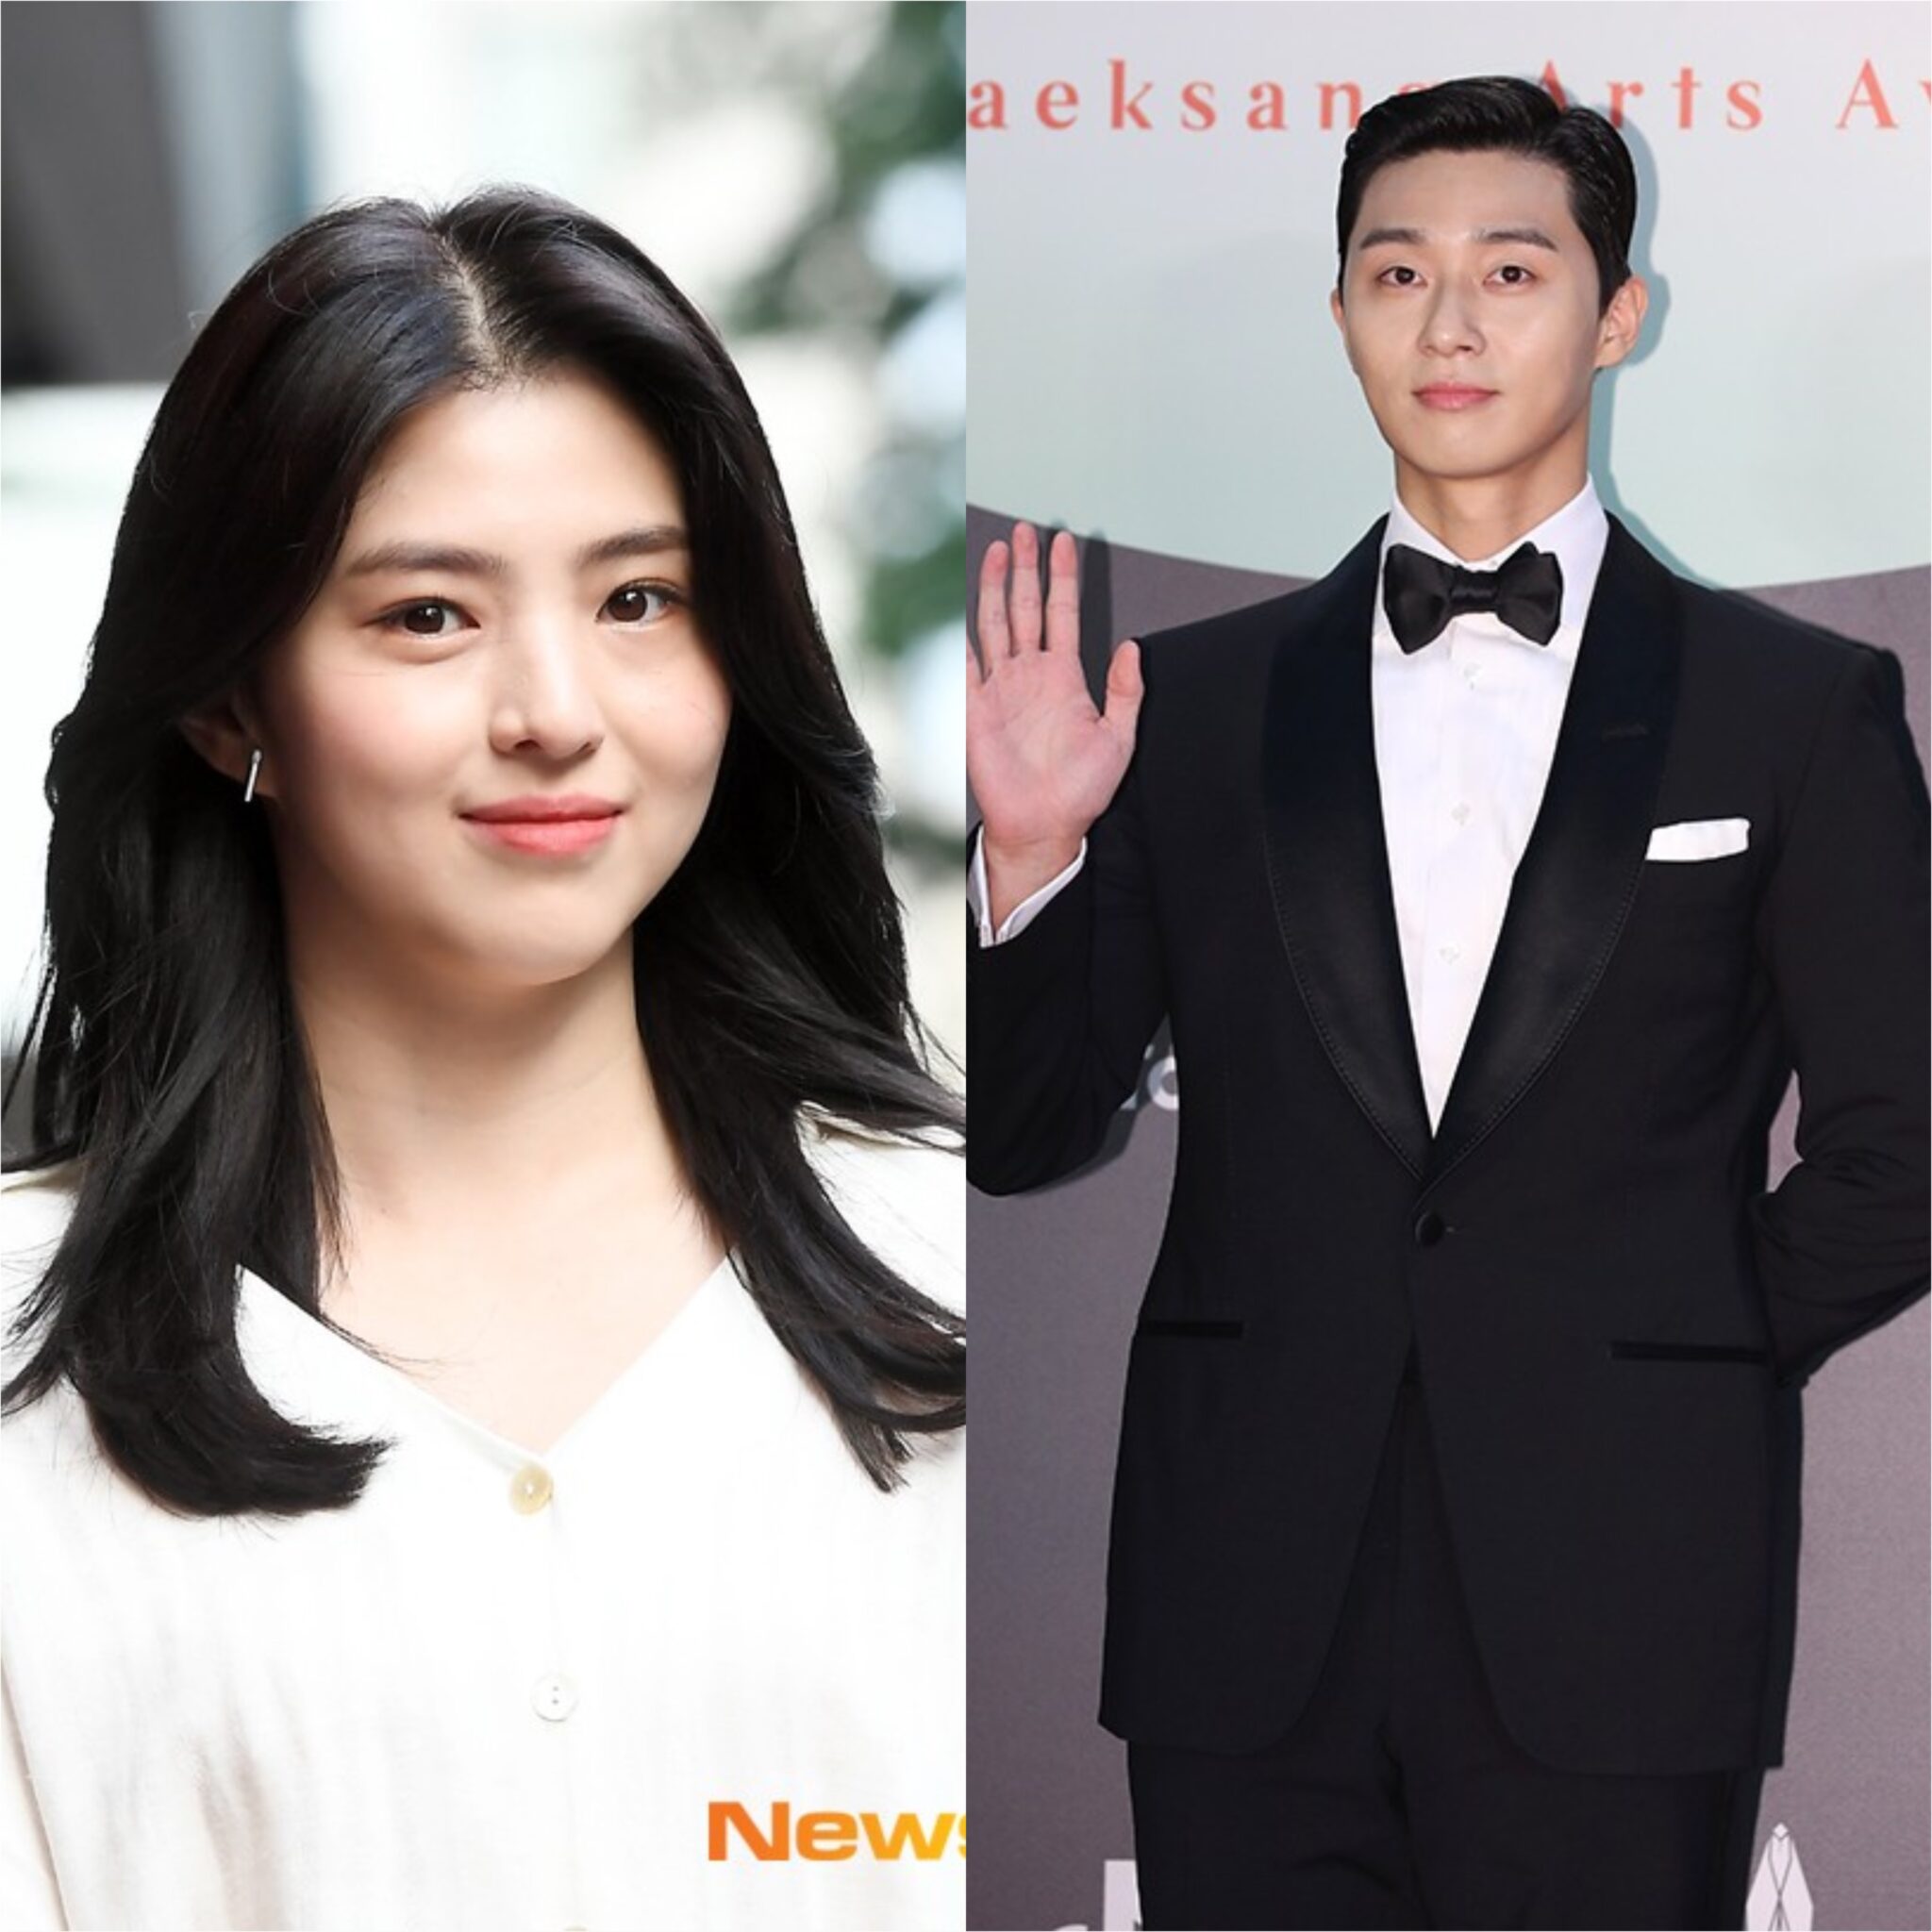 Han So-hee and Park Seo-joon being courted for new drama